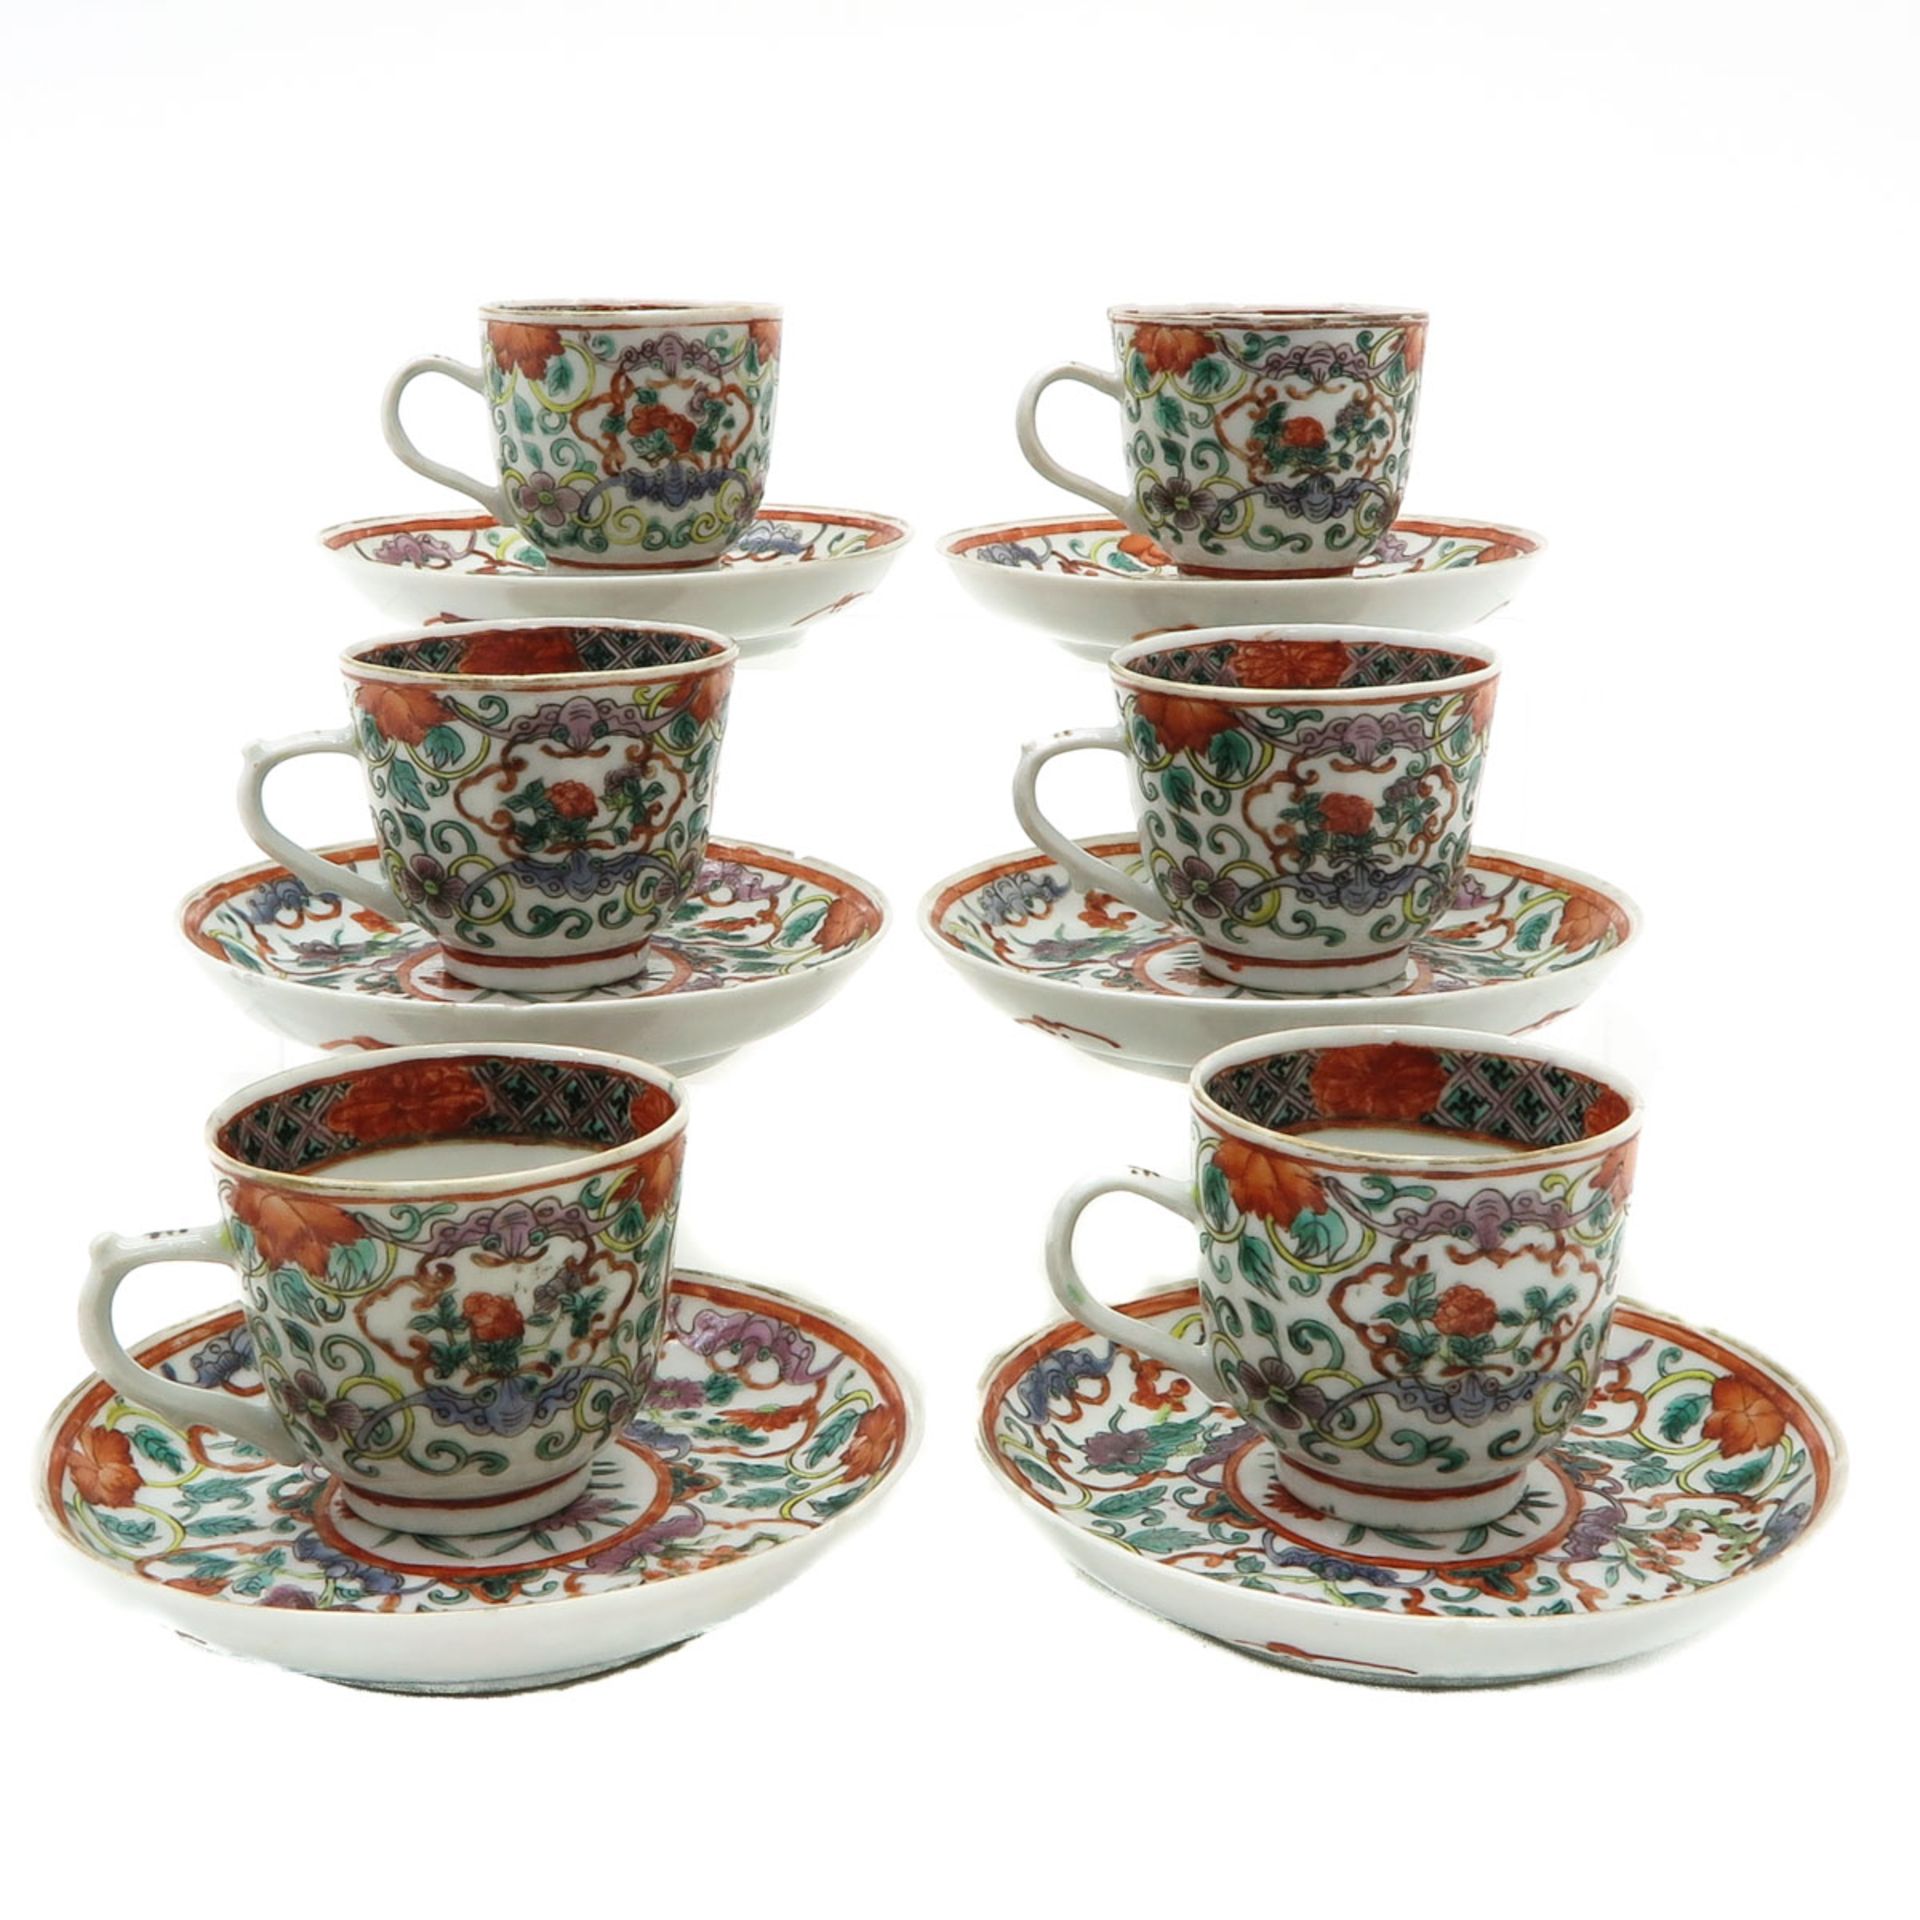 Lot of 6 Cups and Saucers - Bild 3 aus 6